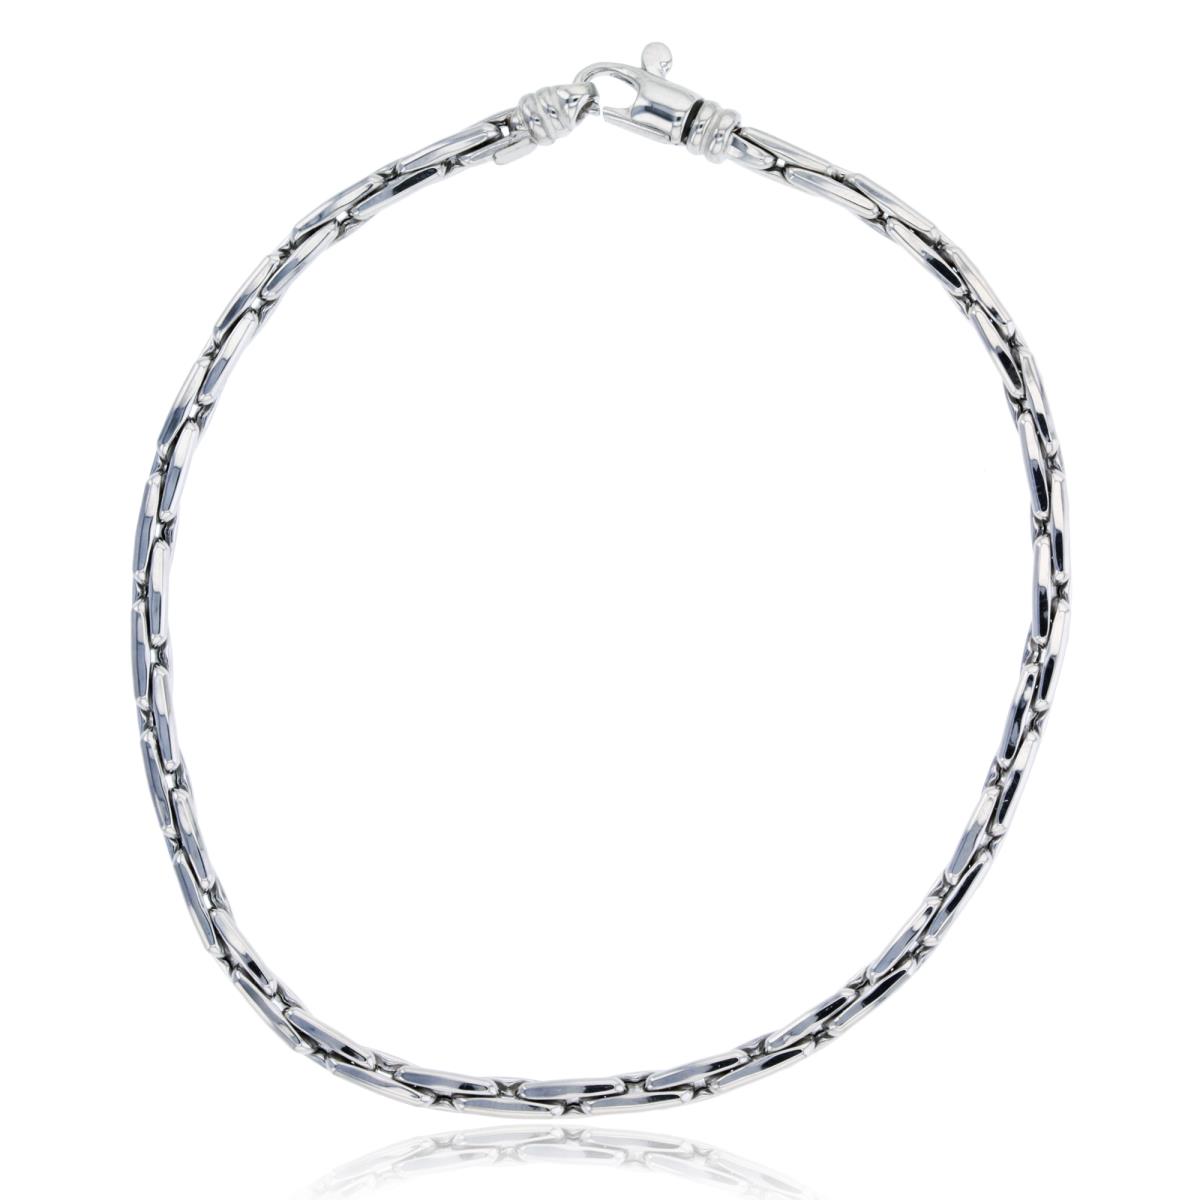 10K White Gold 3.30mm Fancy Elongated Square Cable 7.75" Chain Bracelet